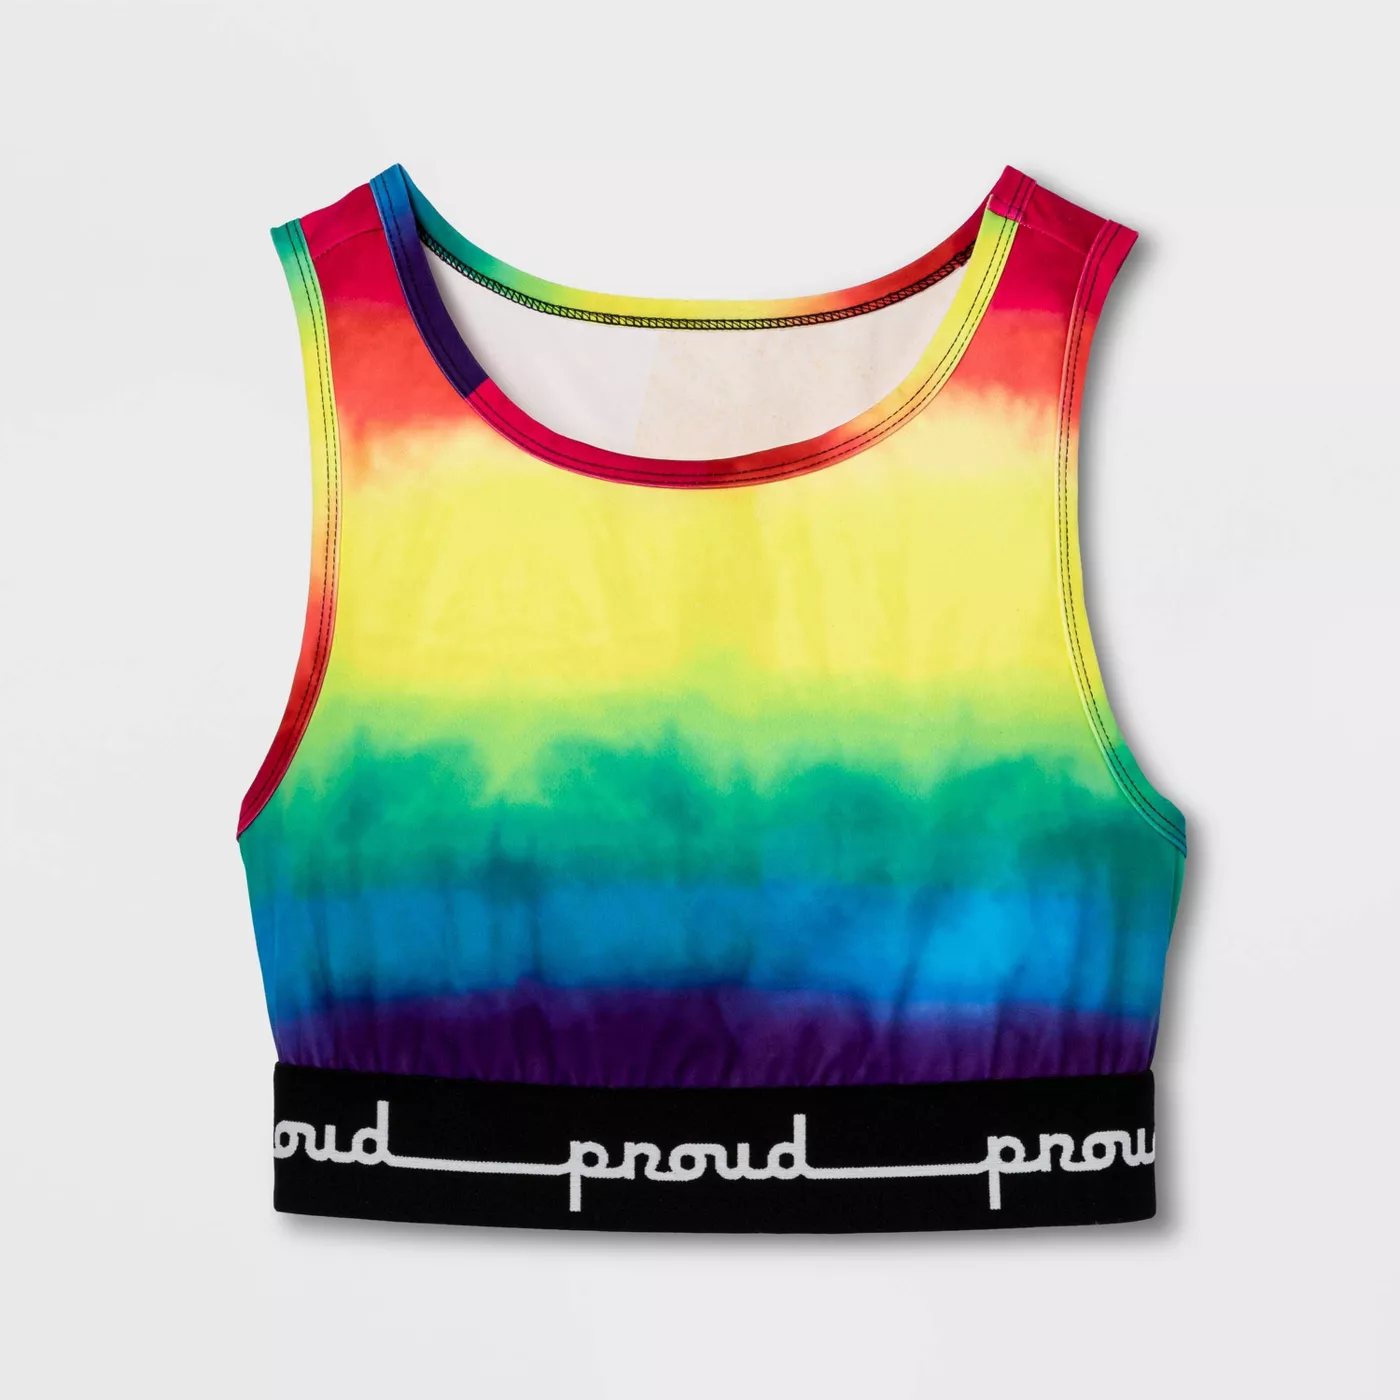 Pride Gender Inclusive Adult Tie-Dye Athletic Crop Top - PH by the Phluid Project - image 3 of 5